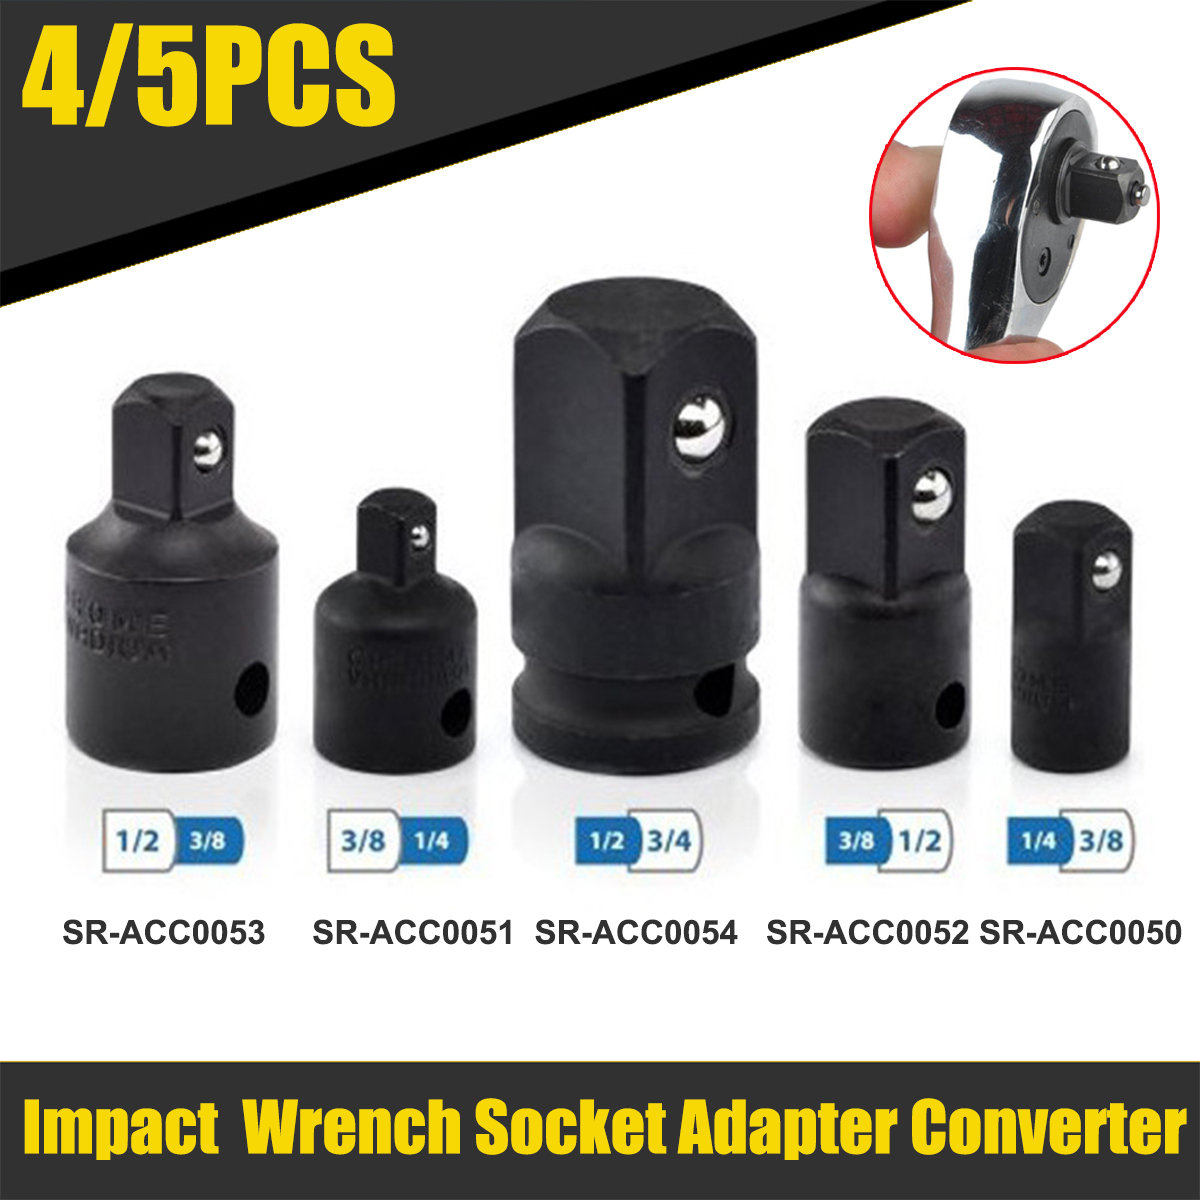 3/8" Female To 1/2" Male 1/4 inch Drive Ratchet Impact Socket Adapter Converter